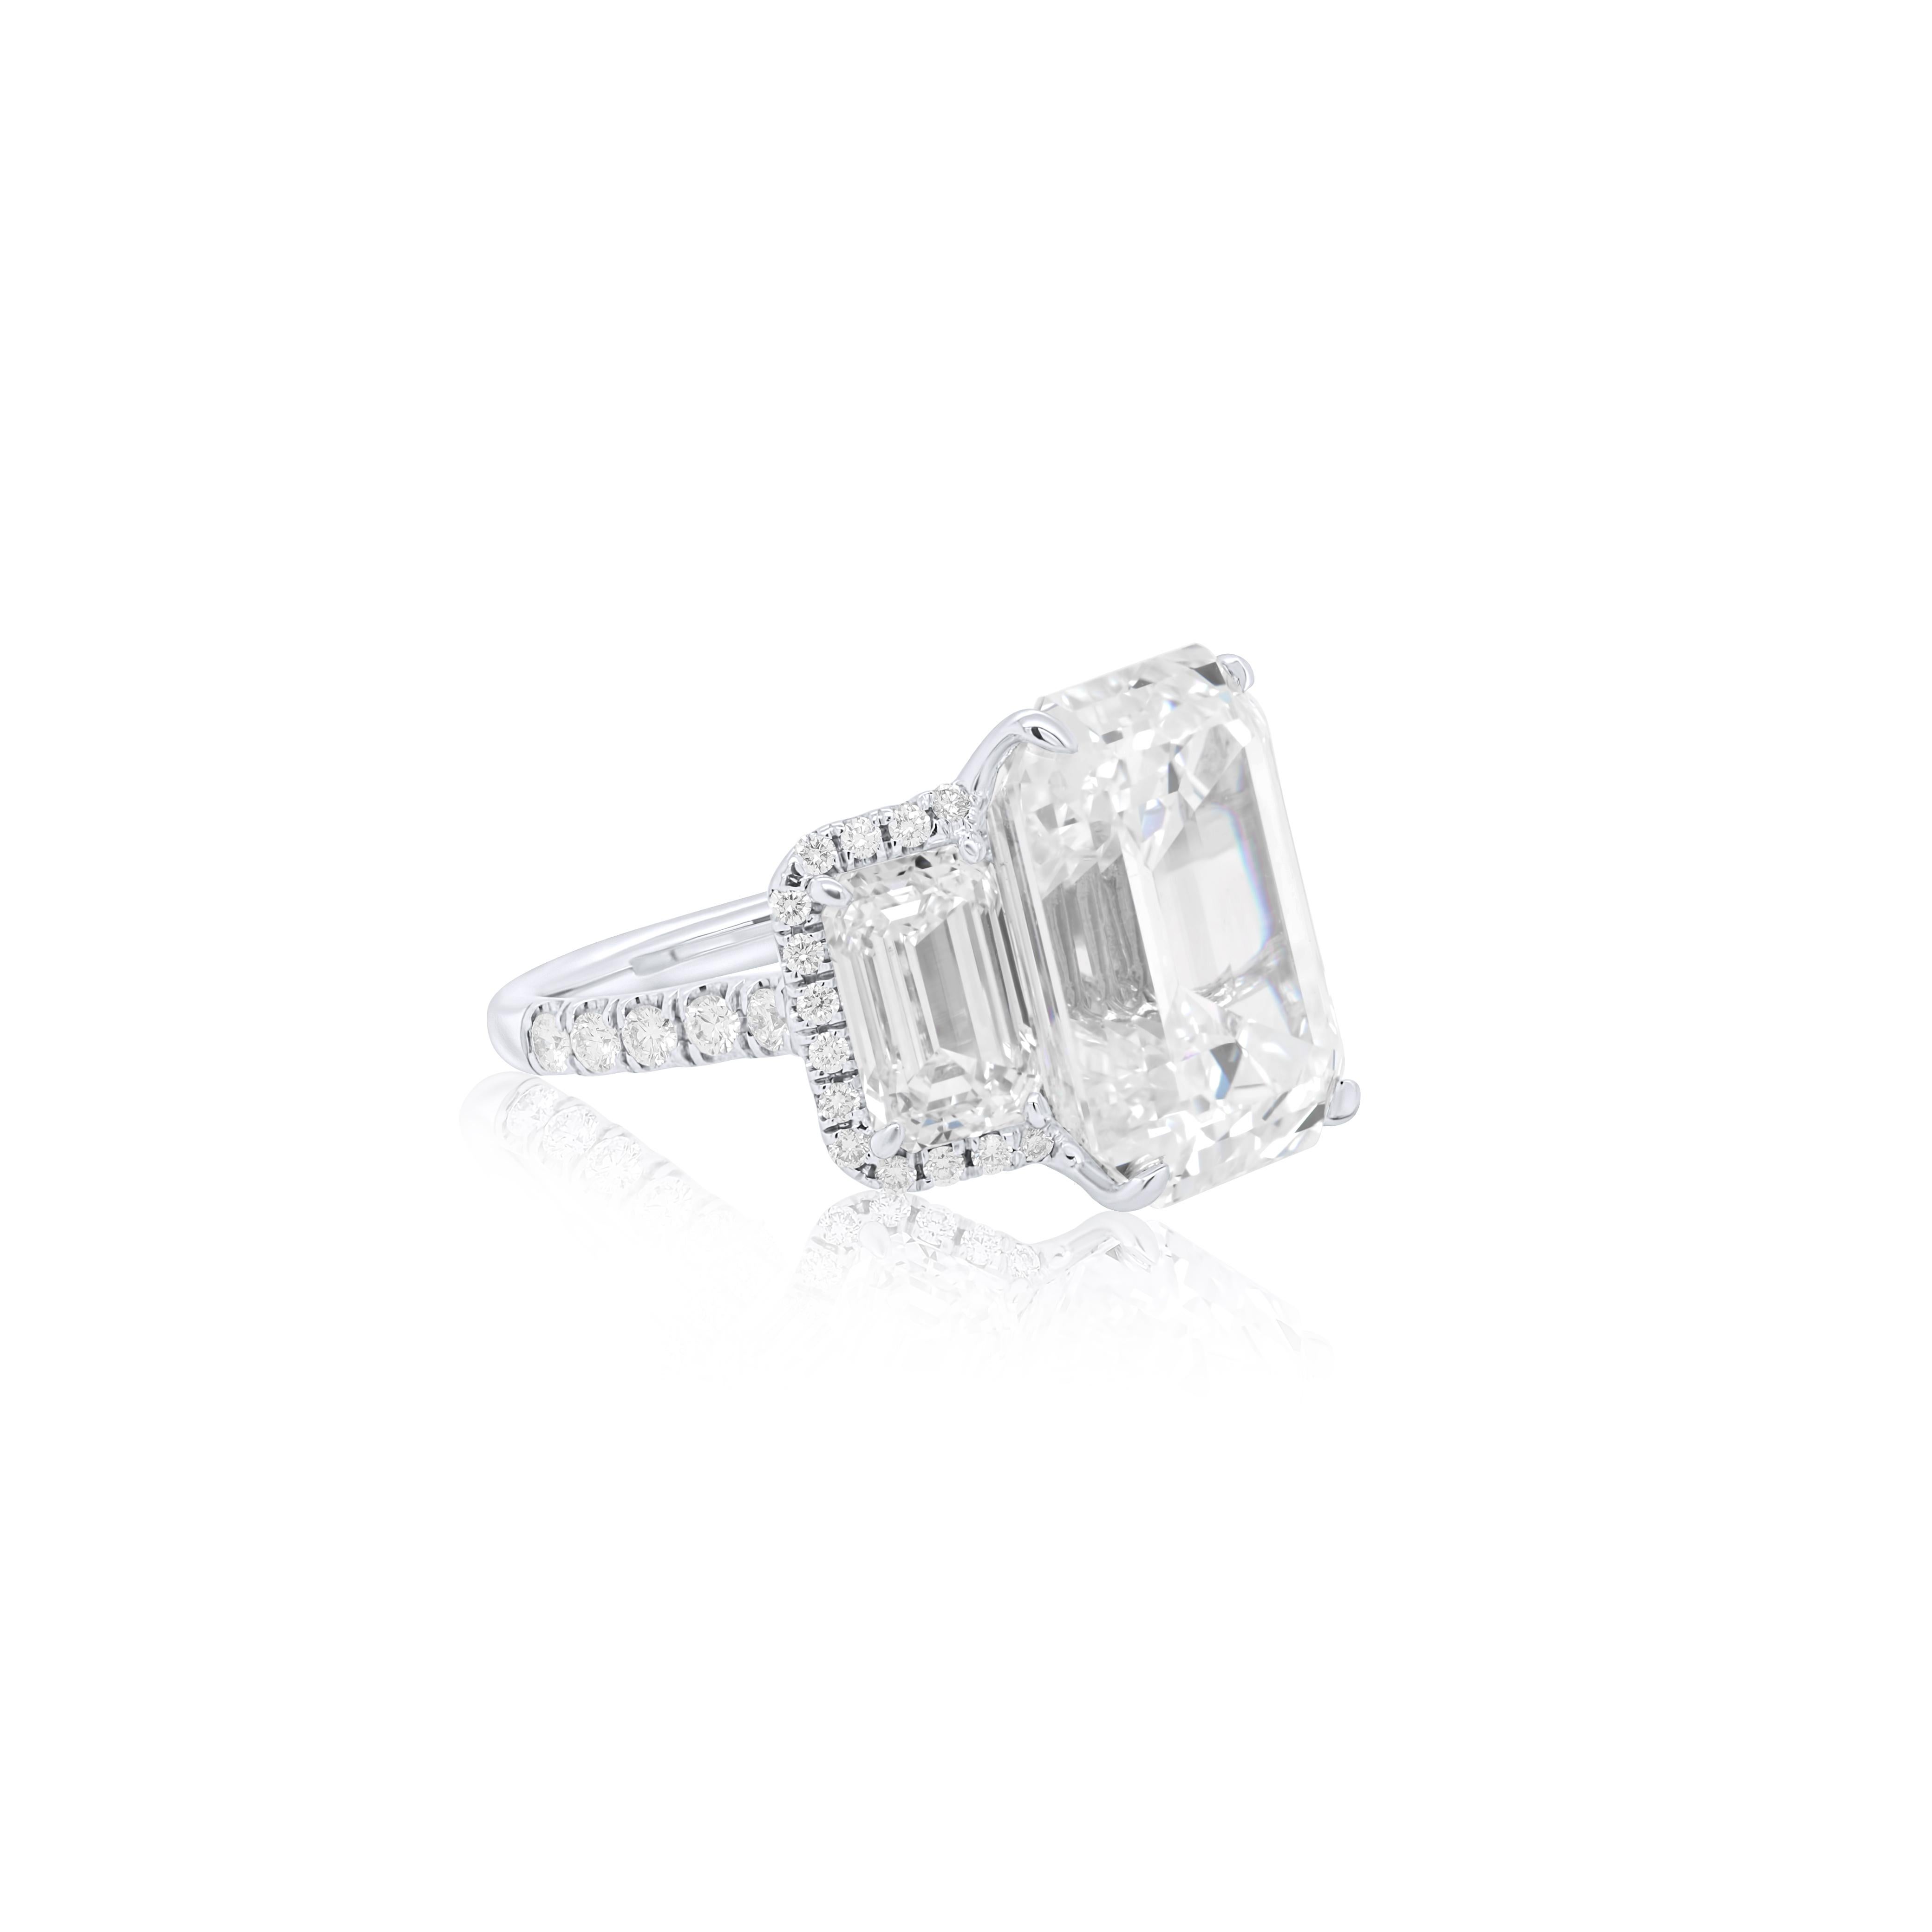 Exquisite three stone diamond engagement ring features three emerald cut diamonds, the center stone is 12.49 Carat I color VVS2 in Clarity Emerald Cut Diamond set with Two GIA Certified Emerald Cut Diamonds on Each Side 4.50 Carats total diamond